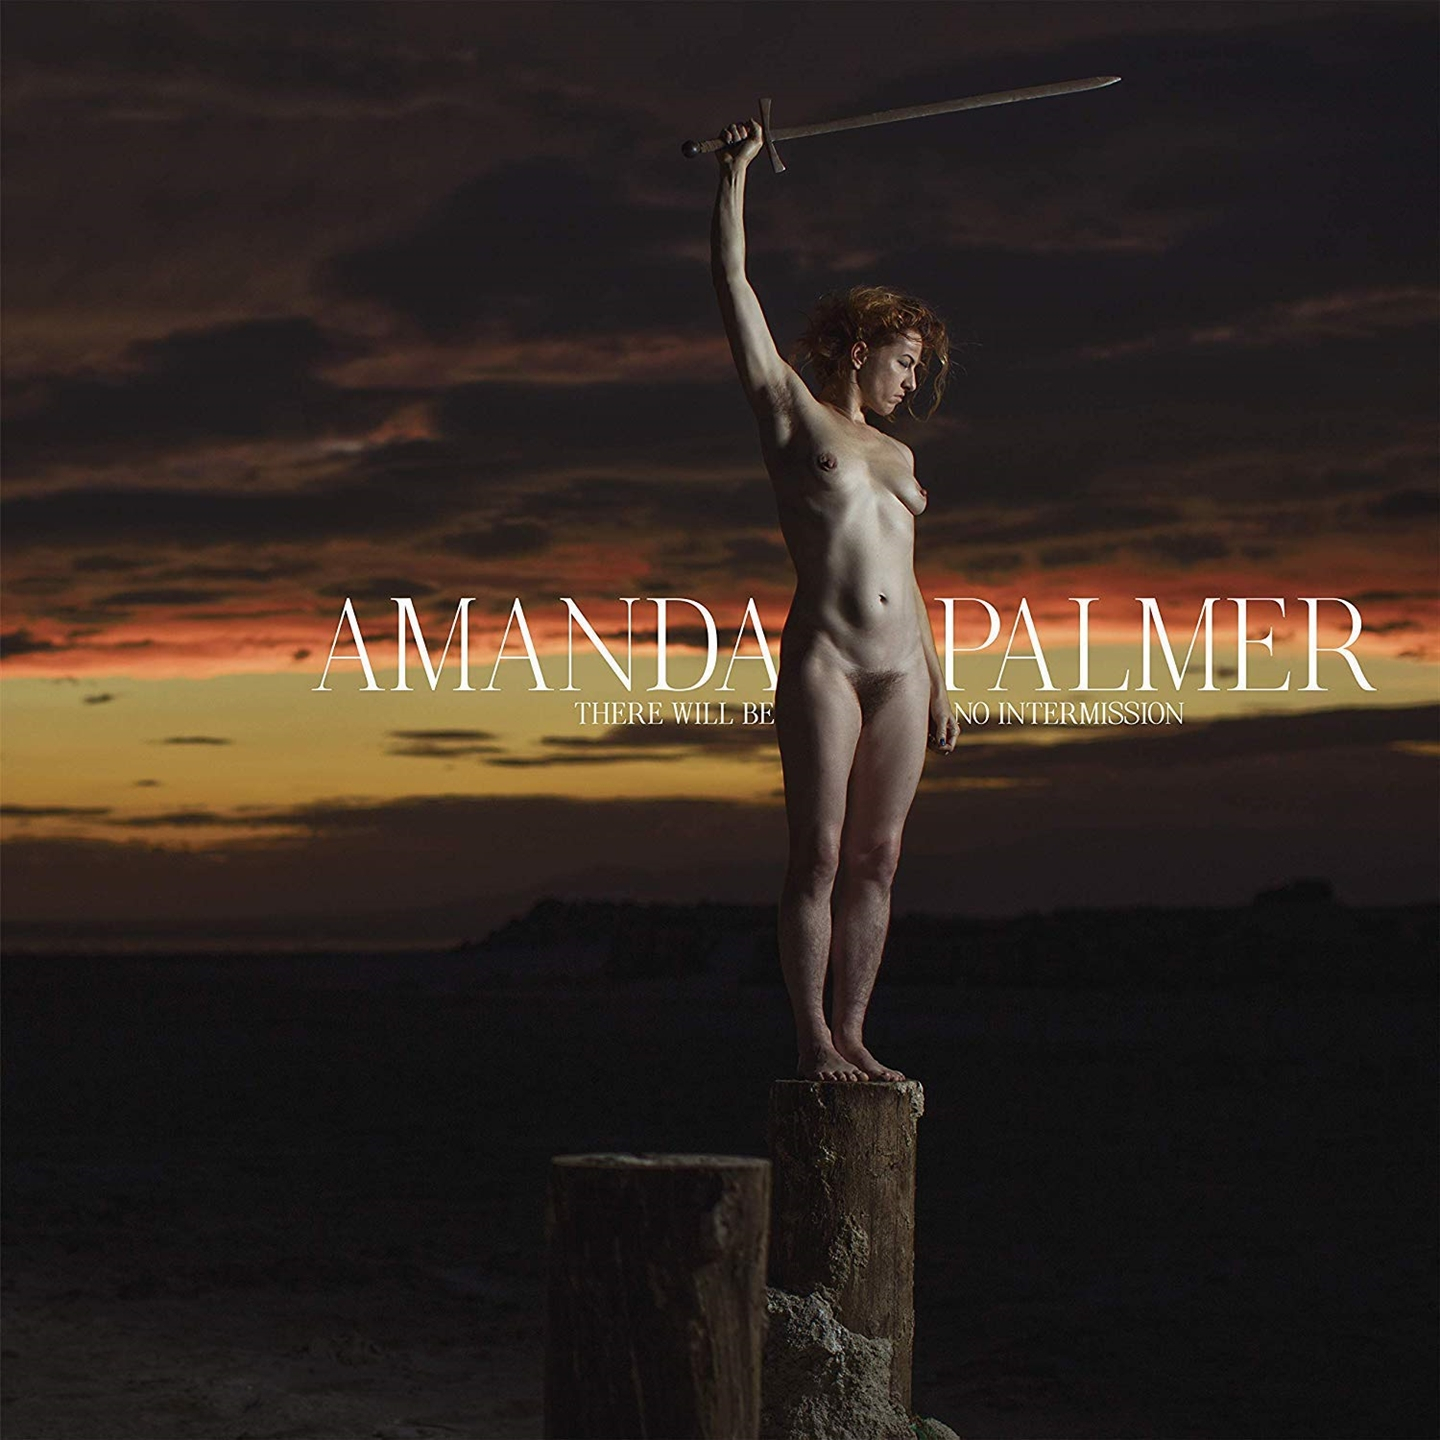 Amanda Palmer - There Will Be No Intermission [Indie Exclusive Ltd.Ed. Lp] - Photo 1/1